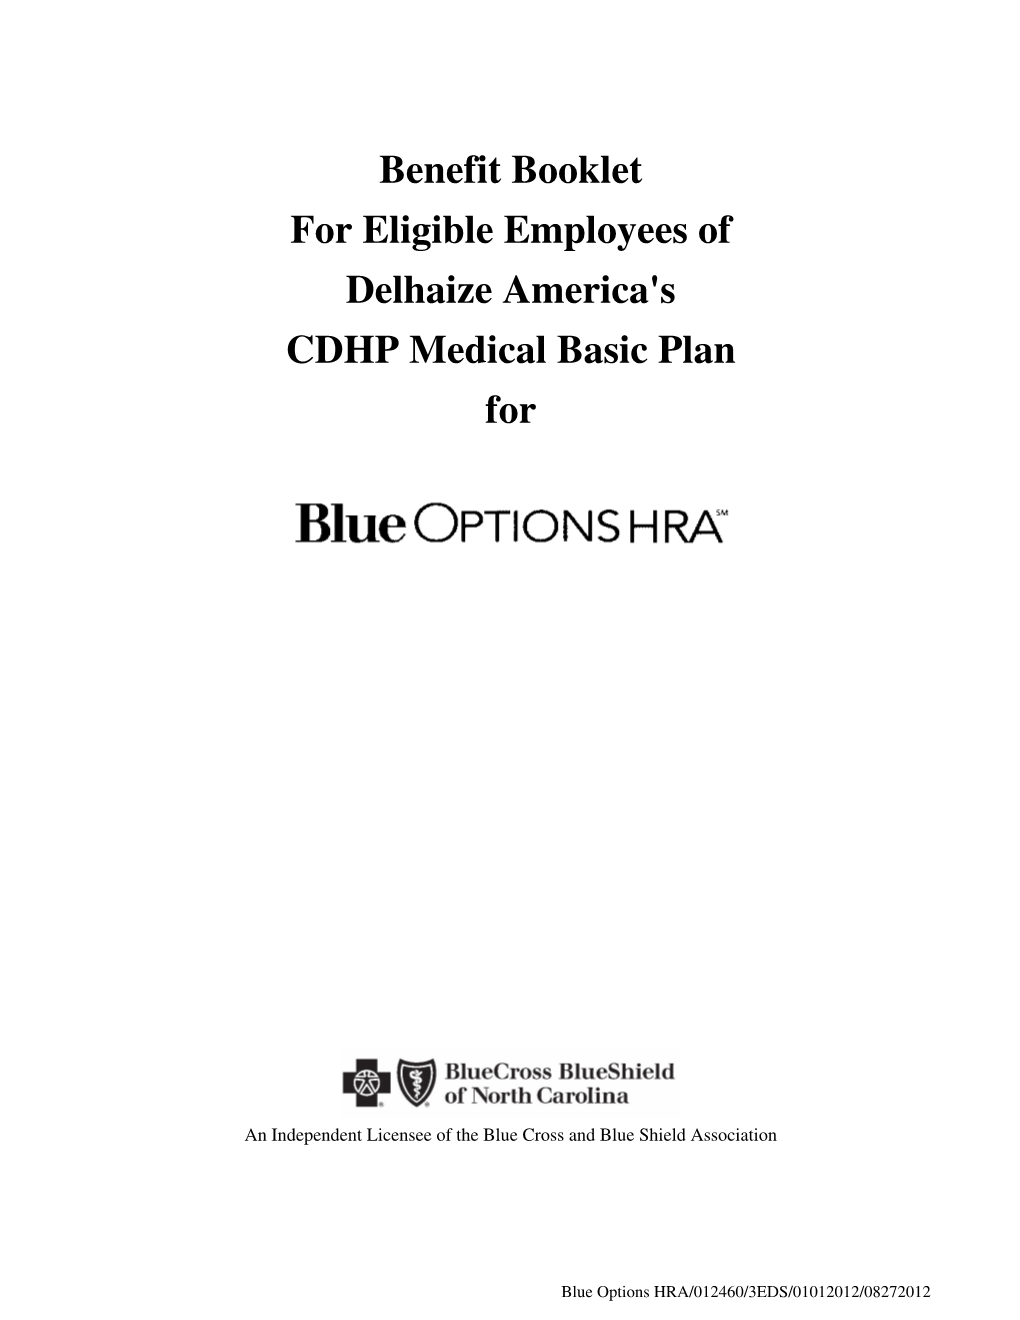 Benefit Booklet for Eligible Employees of Delhaize America's CDHP Medical Basic Plan For